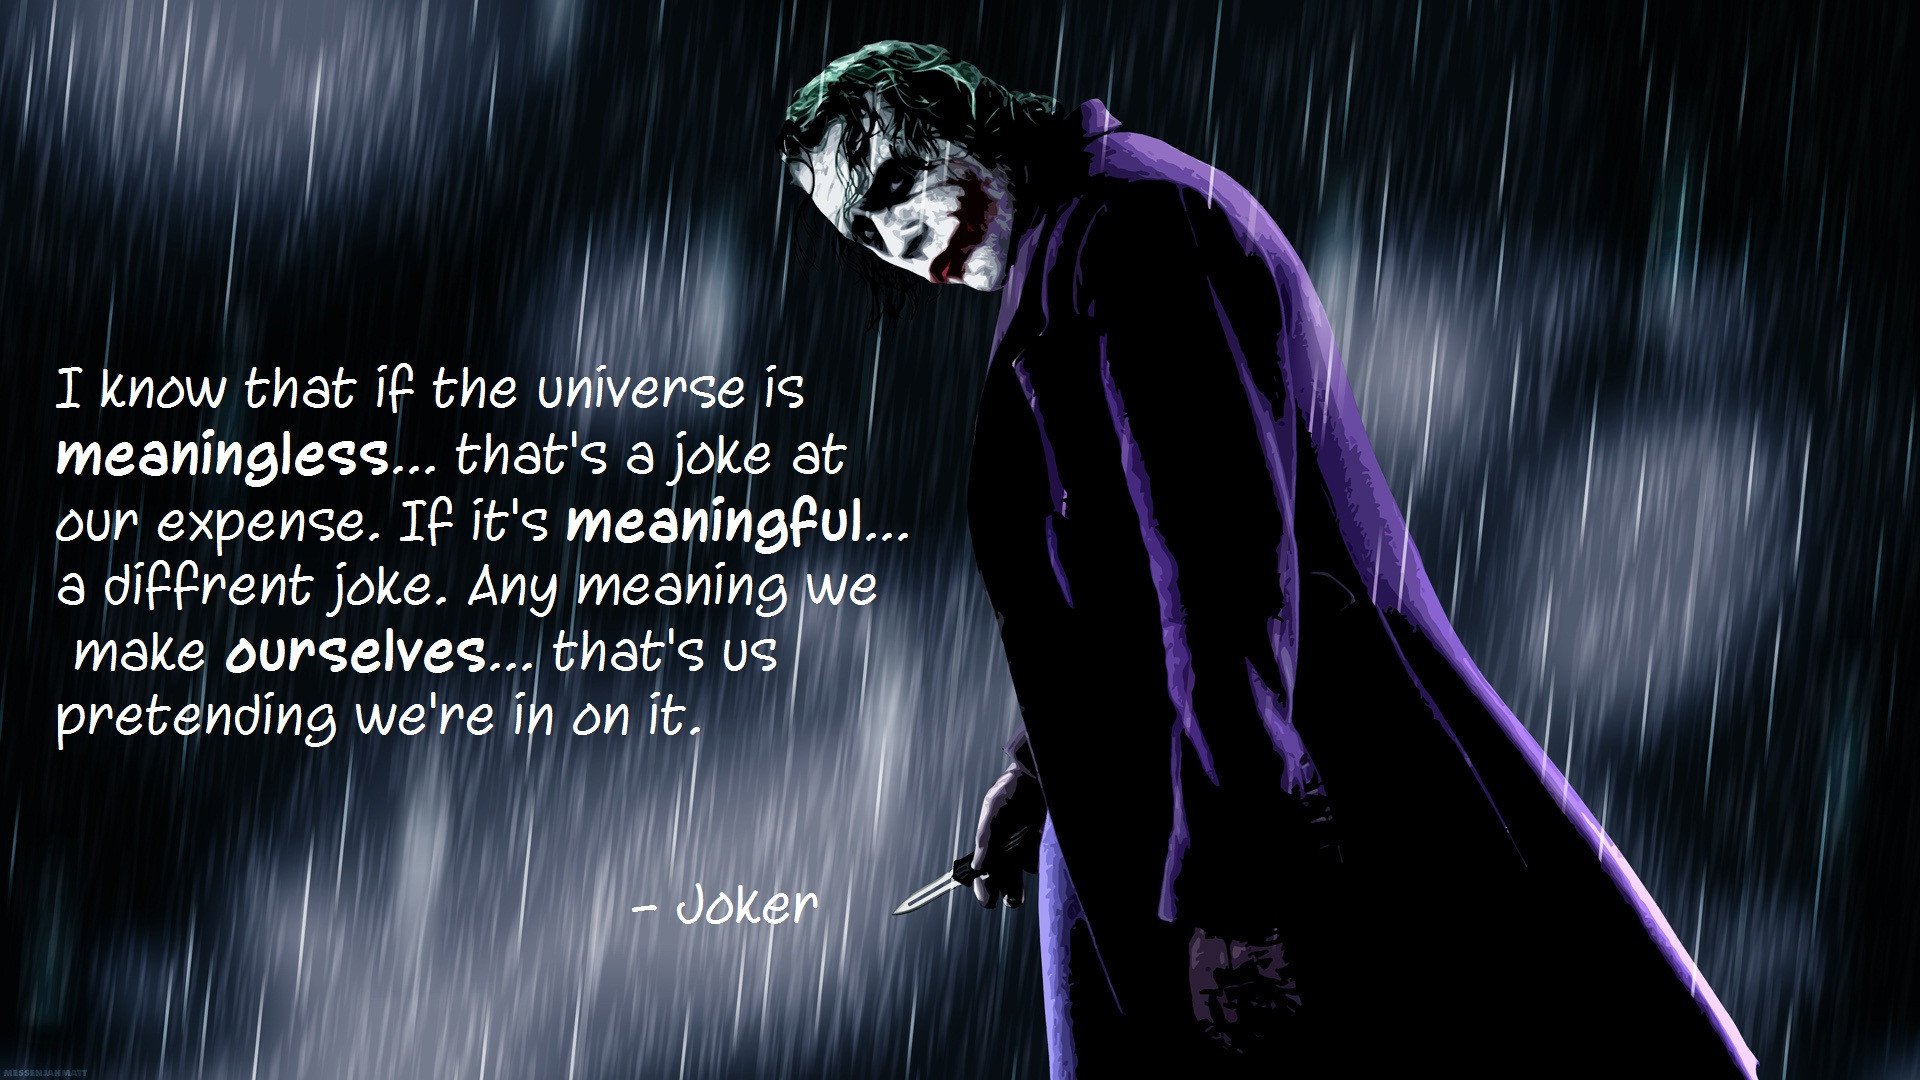 harley quinn and joker love quotes